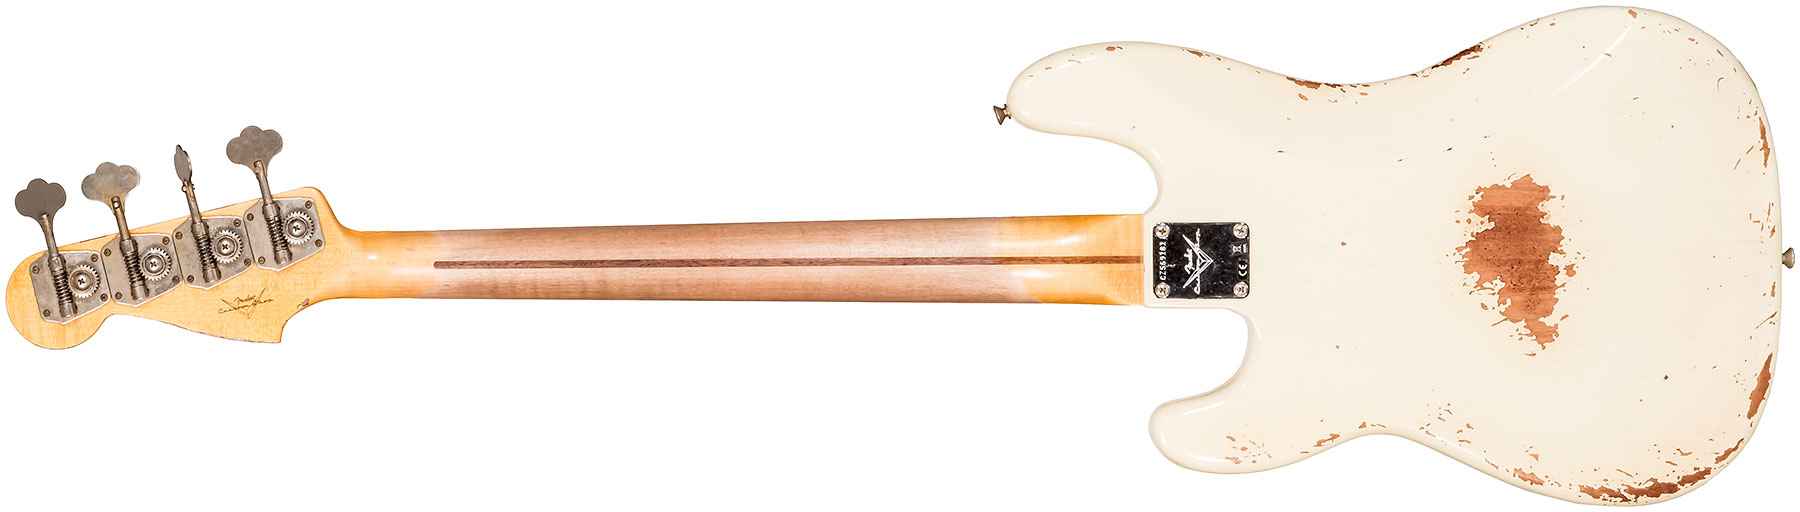 Fender Custom Shop Precision Bass 1958 Mn #cz569181 - Heavy Relic Vintage White - Solid body electric bass - Variation 1